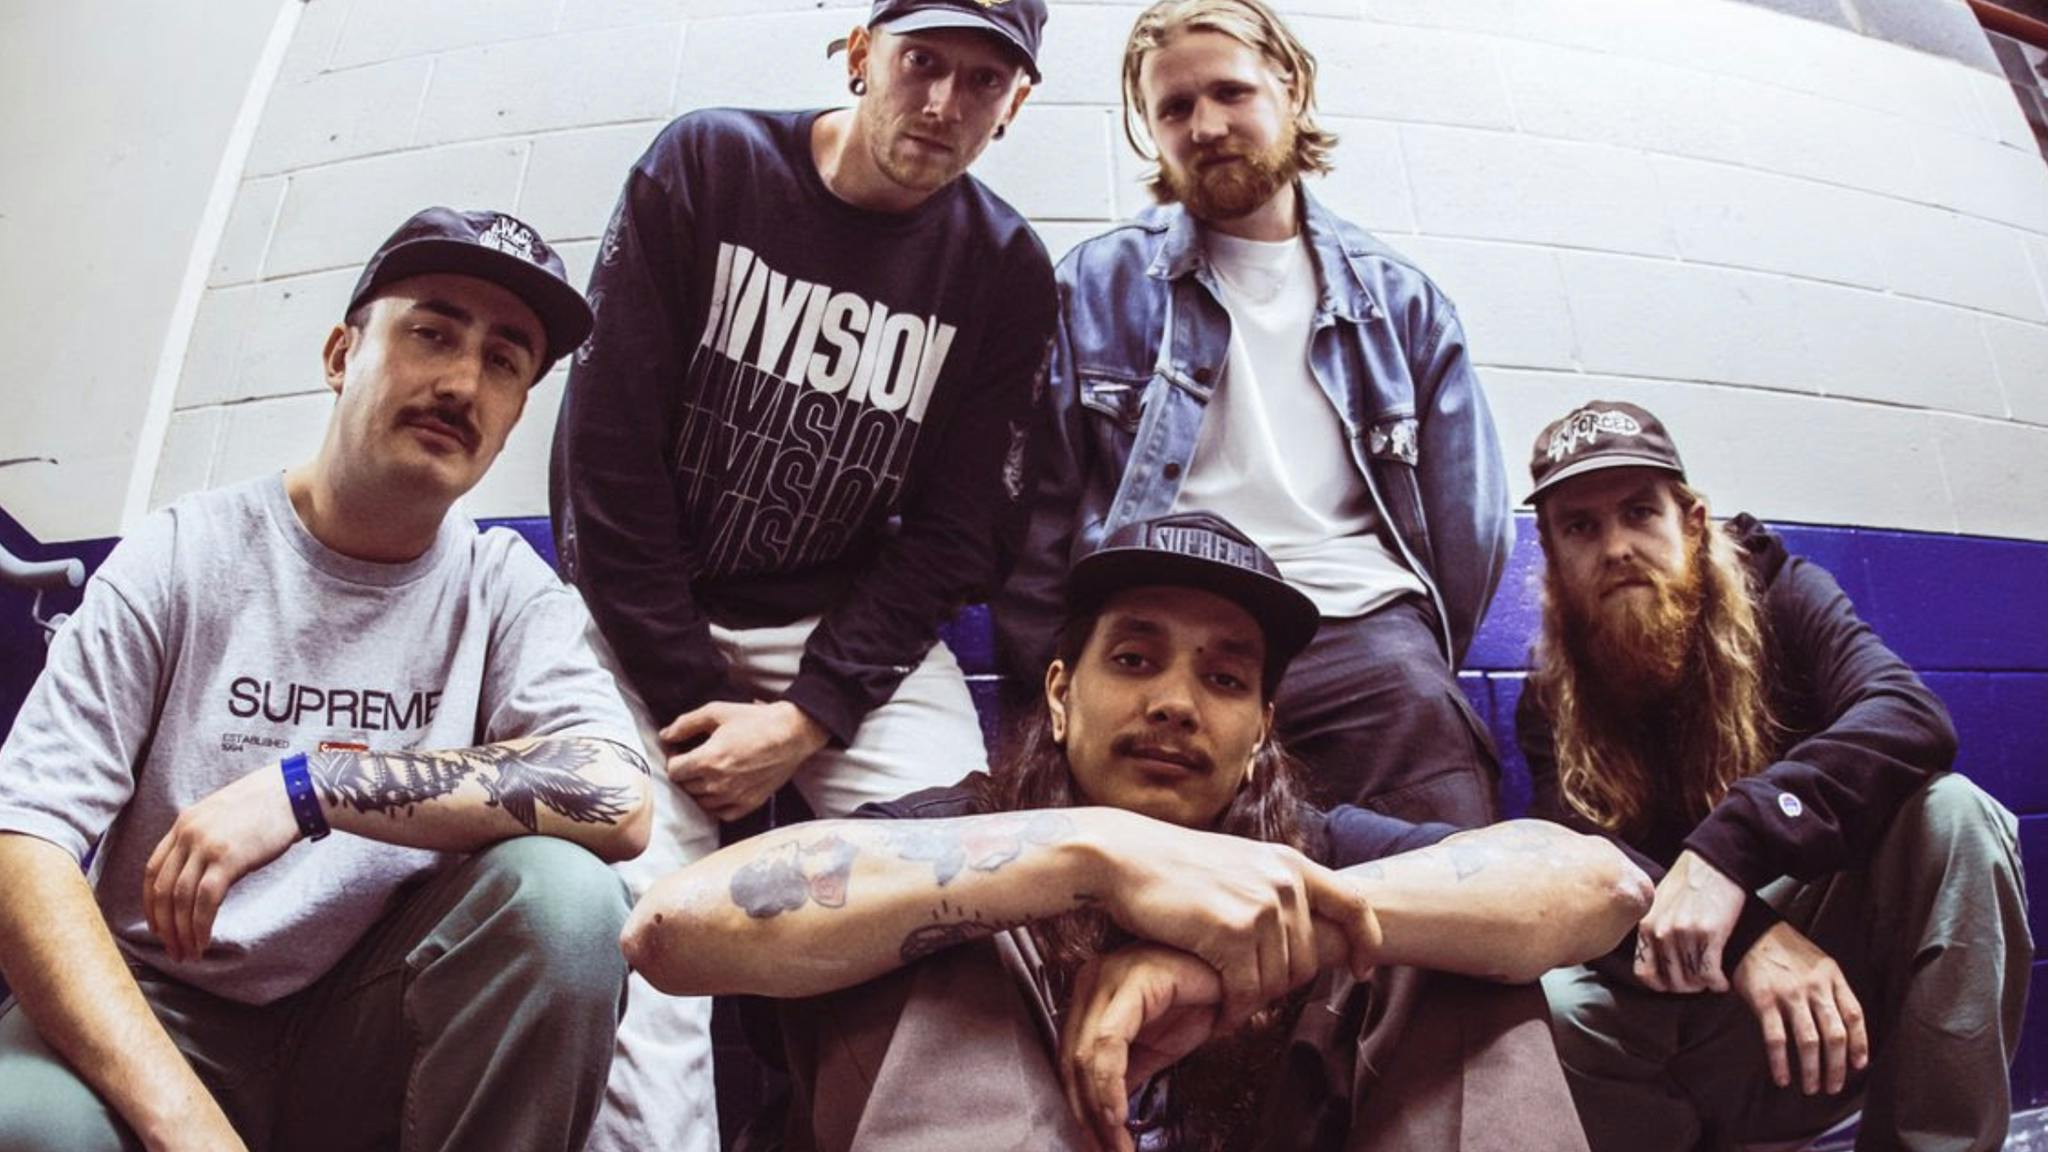 Grove Street share new single and ridiculously fun music video